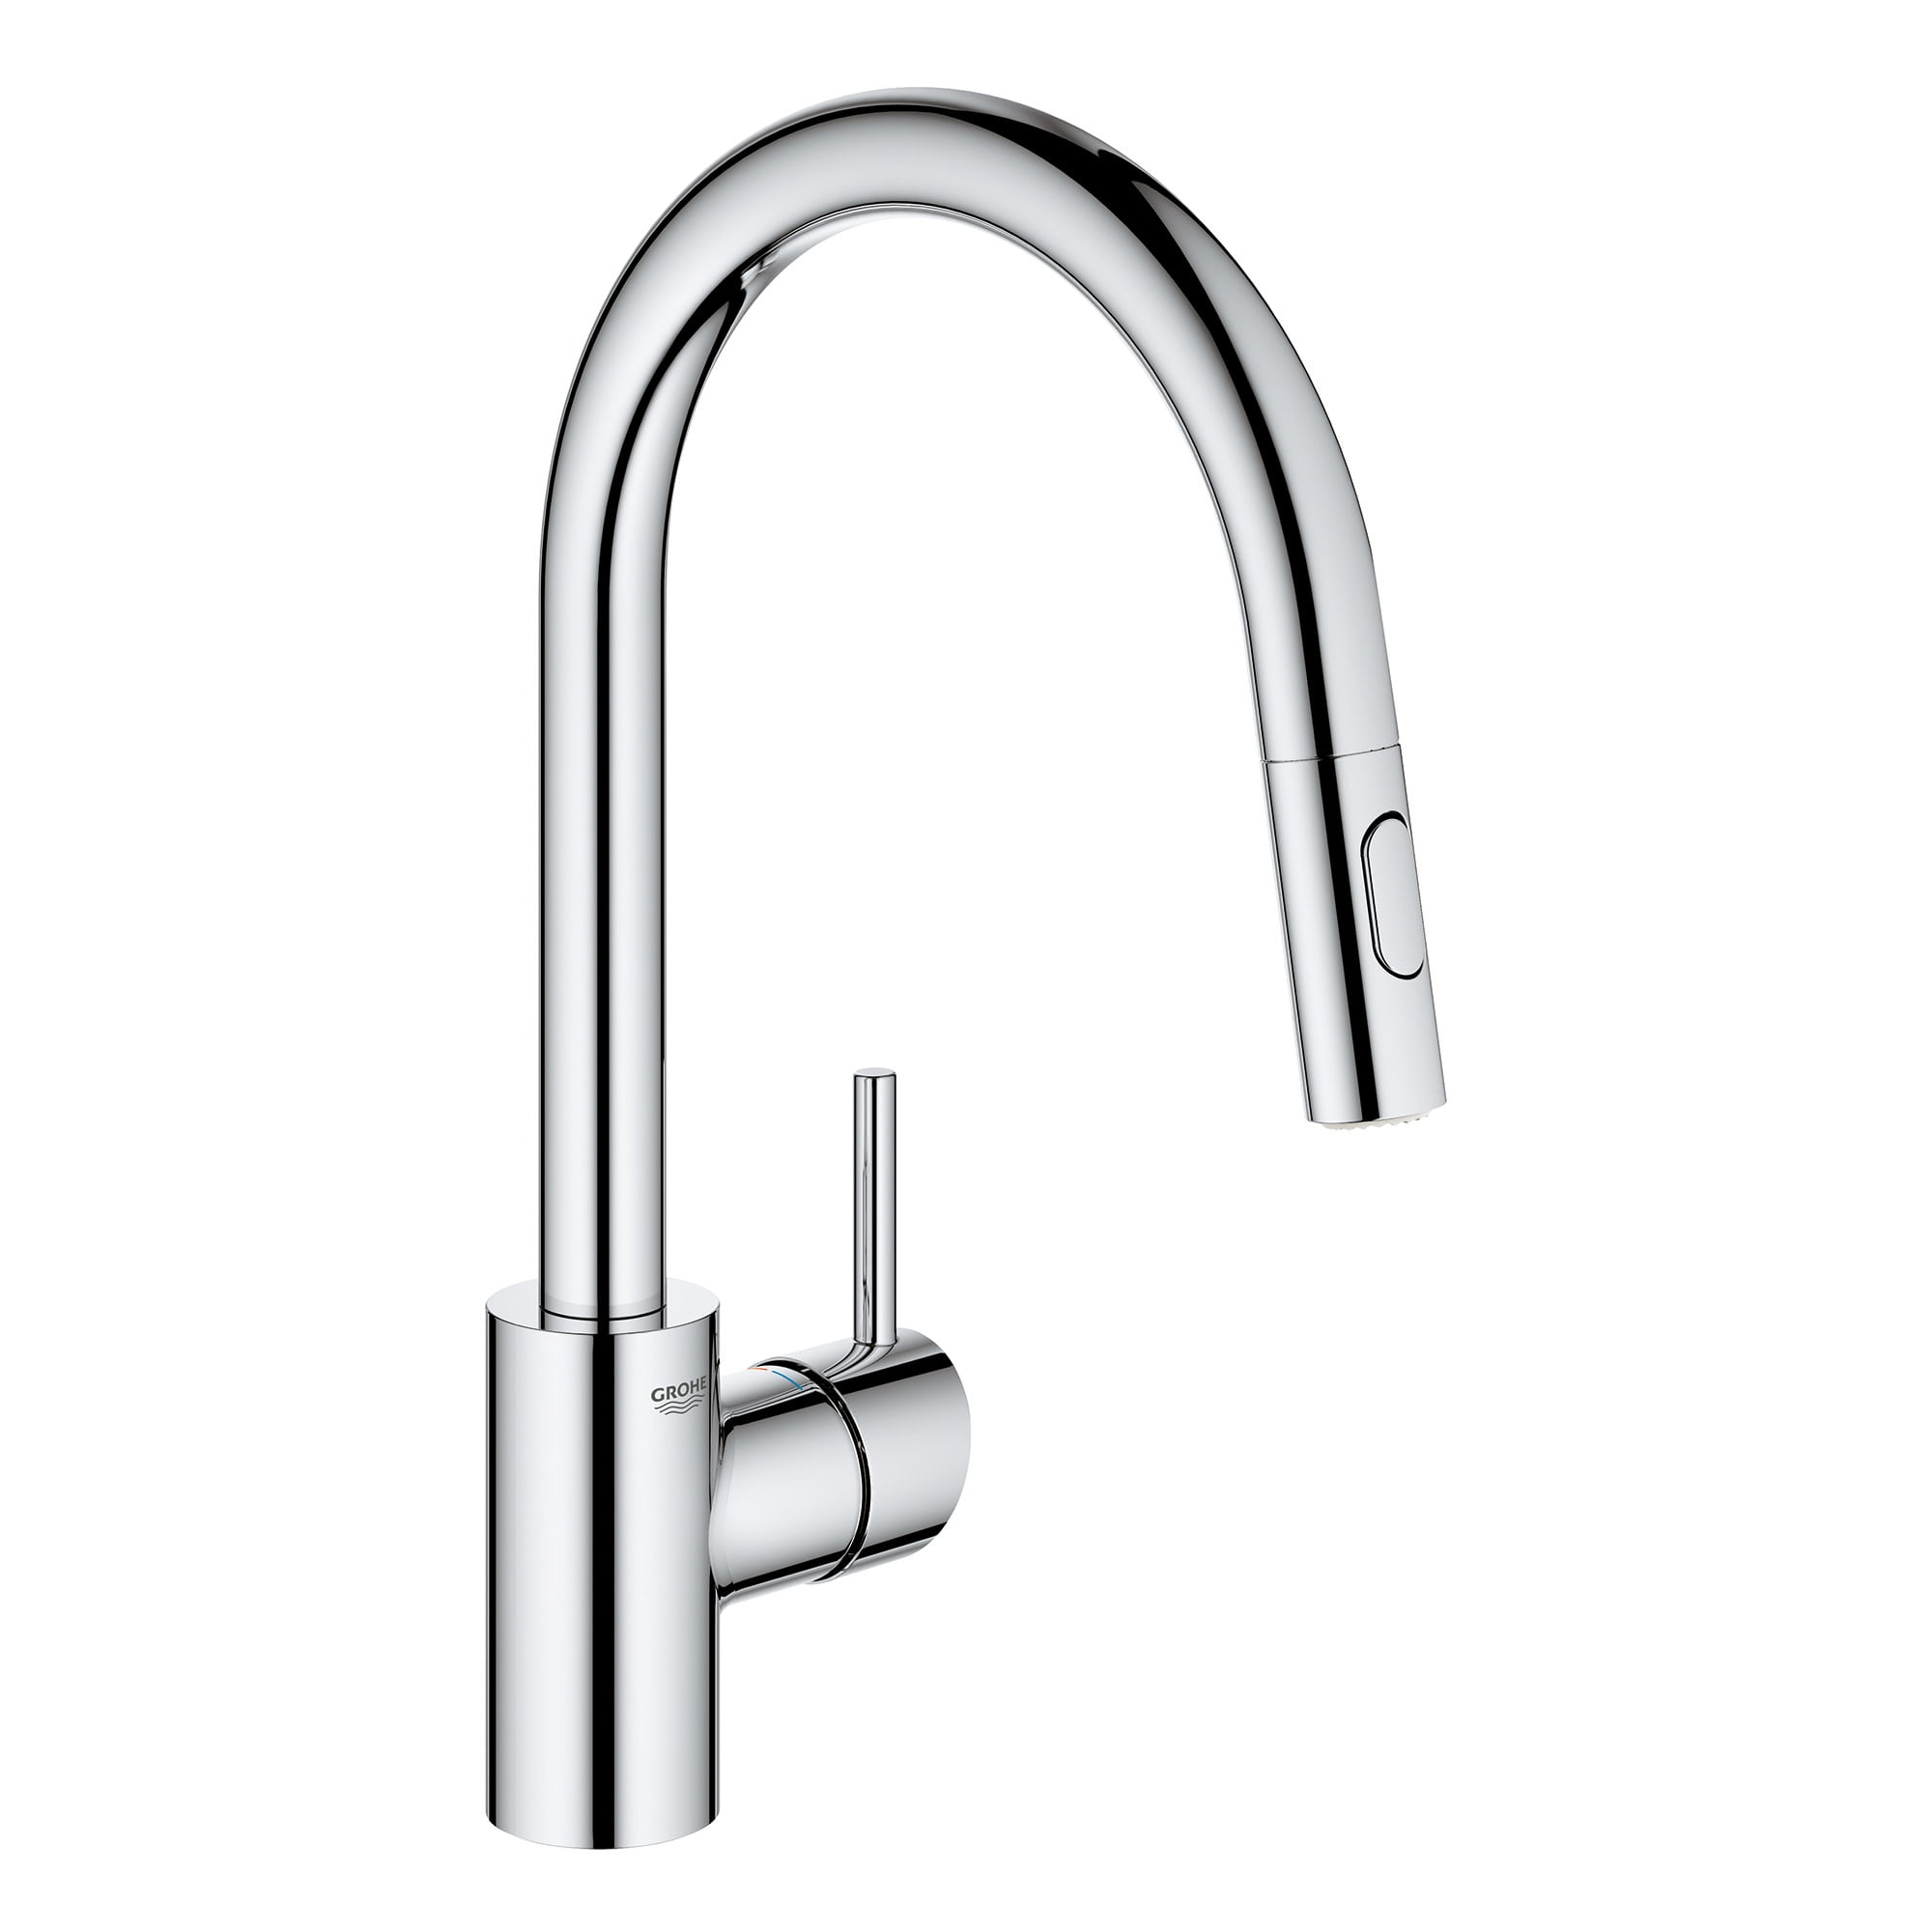 Intrekking Reusachtig Molester Grohe 31 349 E Concetto 1.5 GPM Single Hole Pull Down Kitchen Faucet -  Chrome - Walmart.com